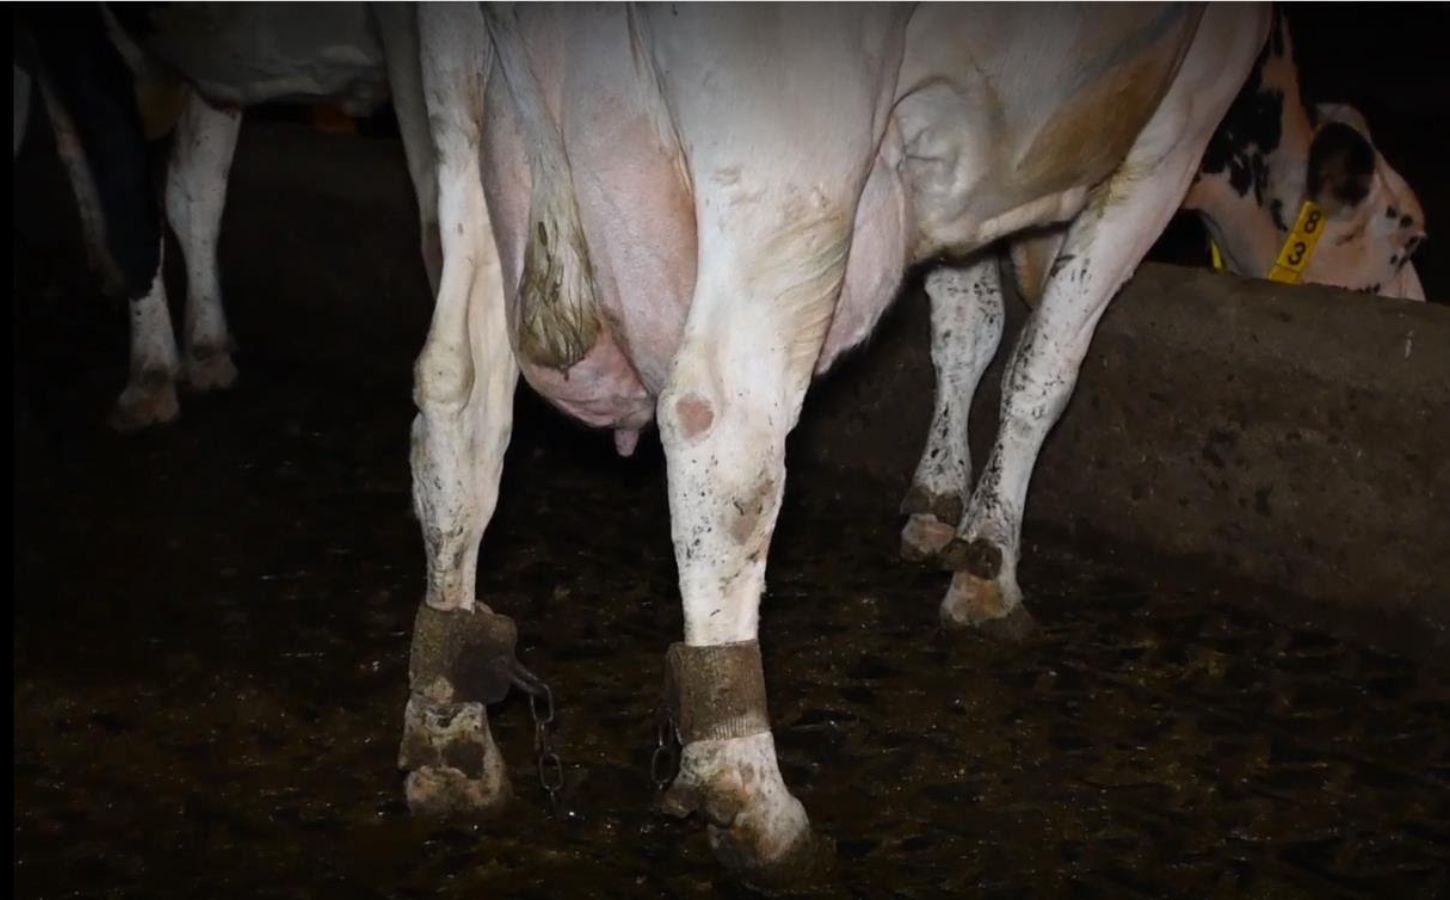 A photograph by Viva! of a dairy cow on a farm with an inflamed udder and shackled legs